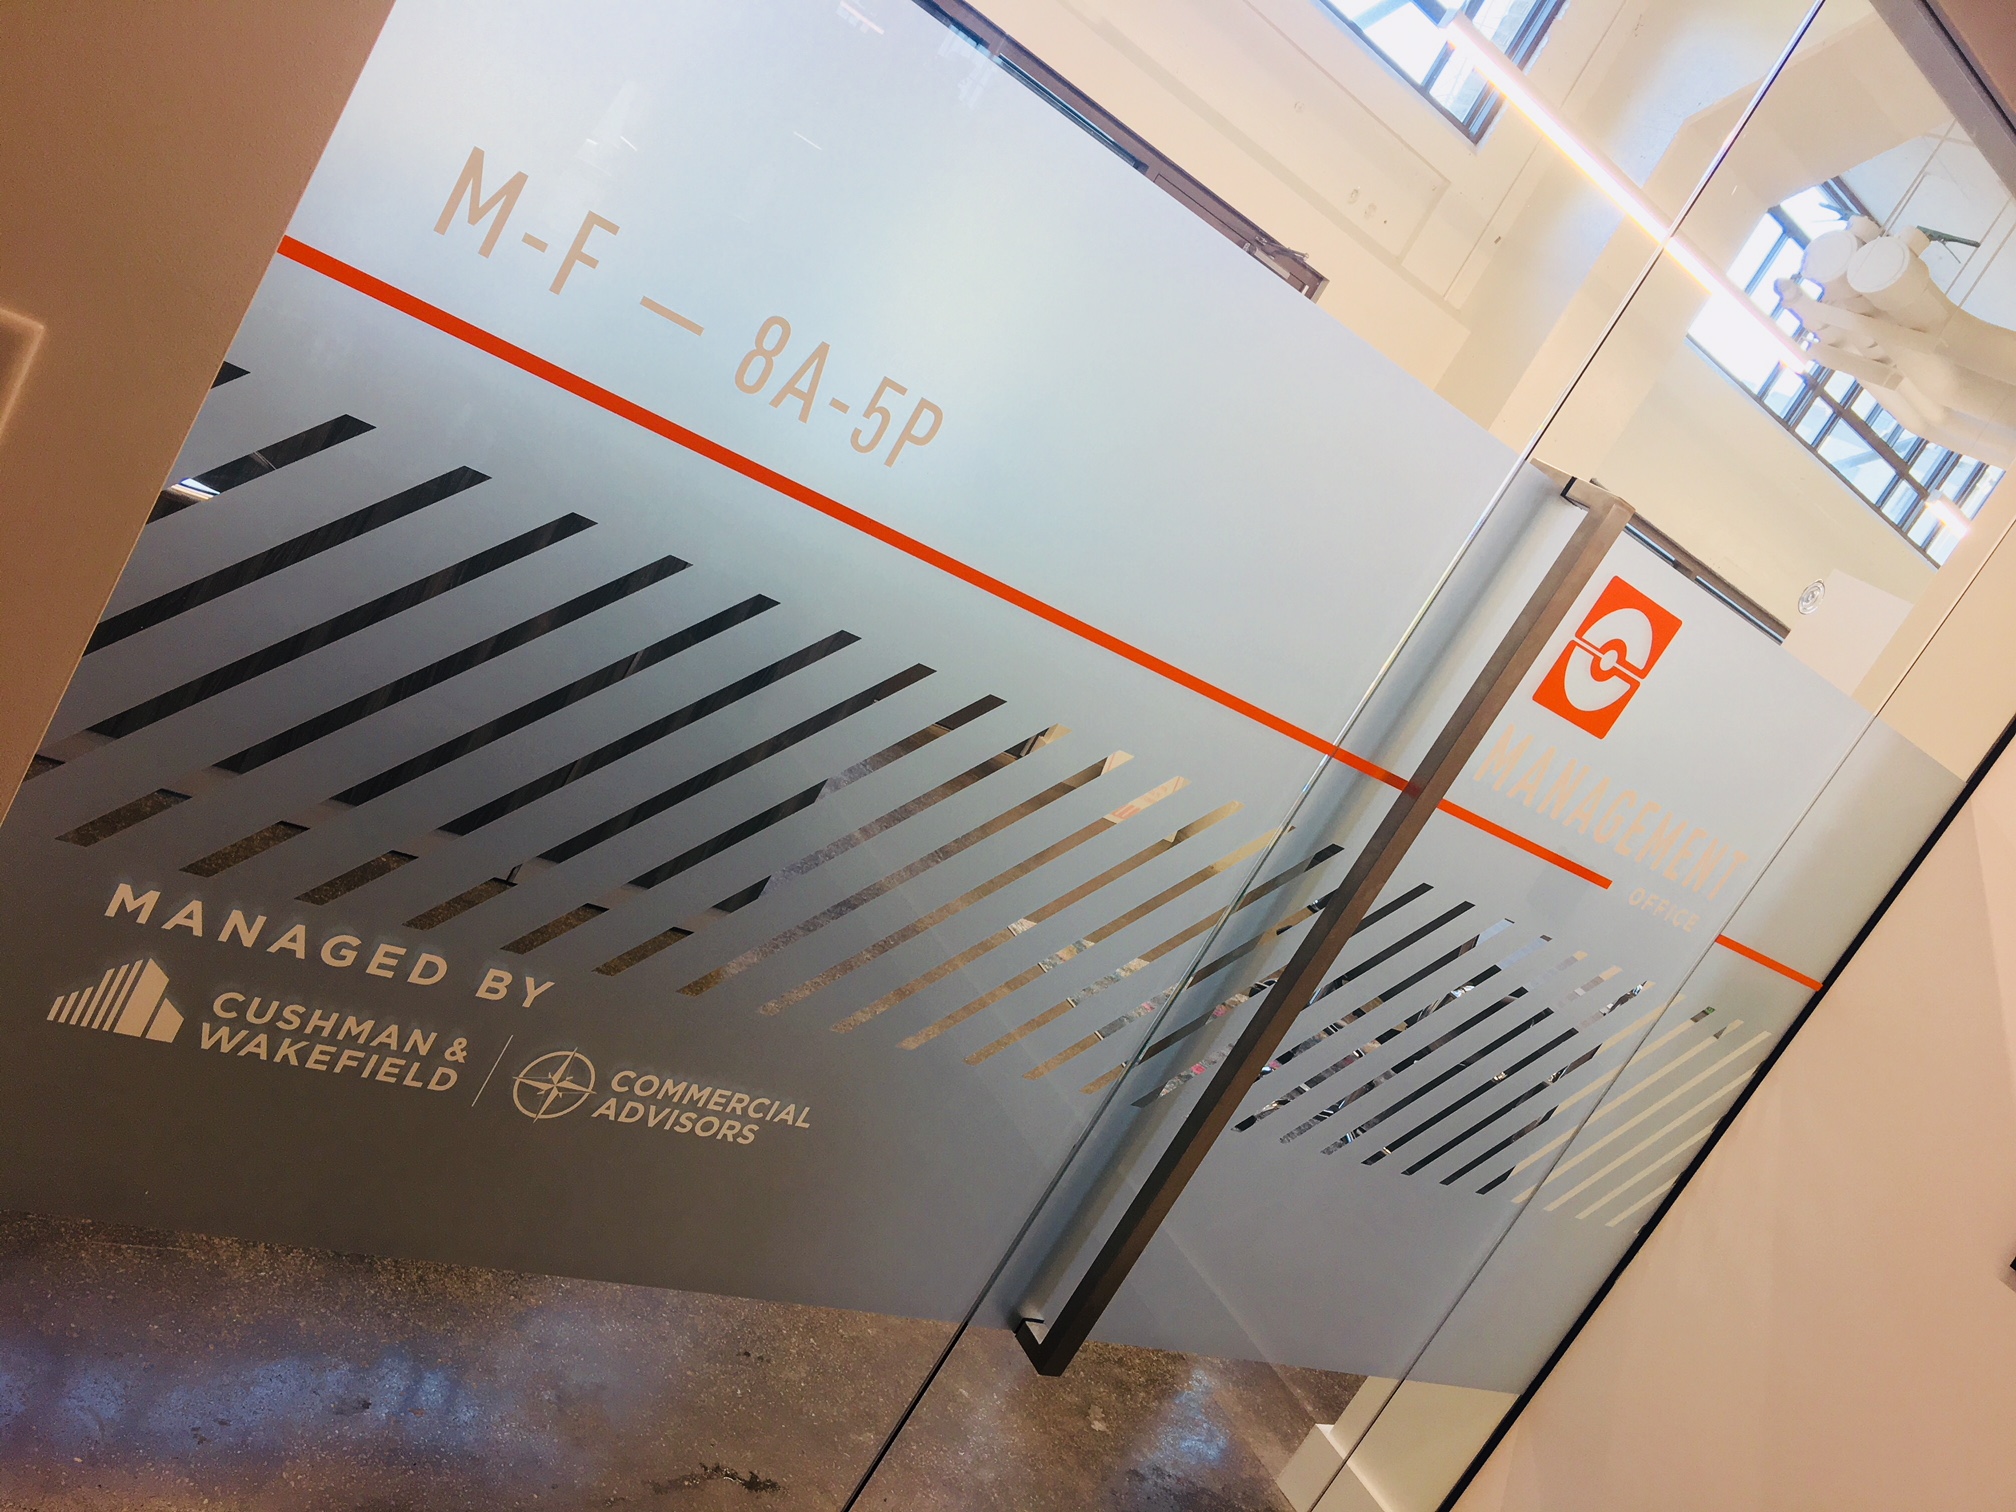 Crosstown Concourse Etched Glass Reversed Out w/ Graphic Vinyl